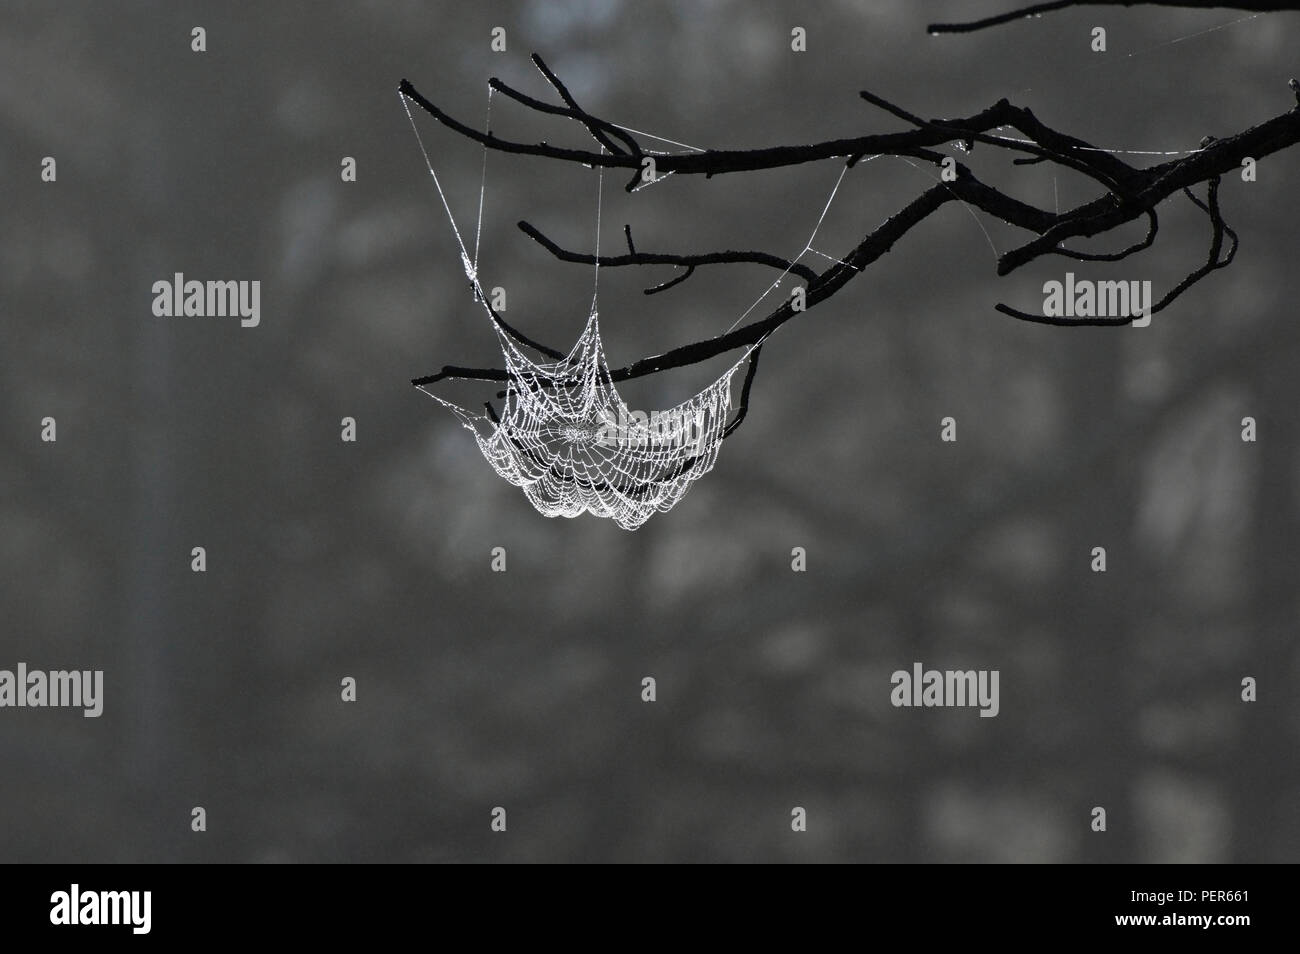 Spider web hanging from a  tree in the mist, Yellowstone National Park, Wyoming, United States Stock Photo